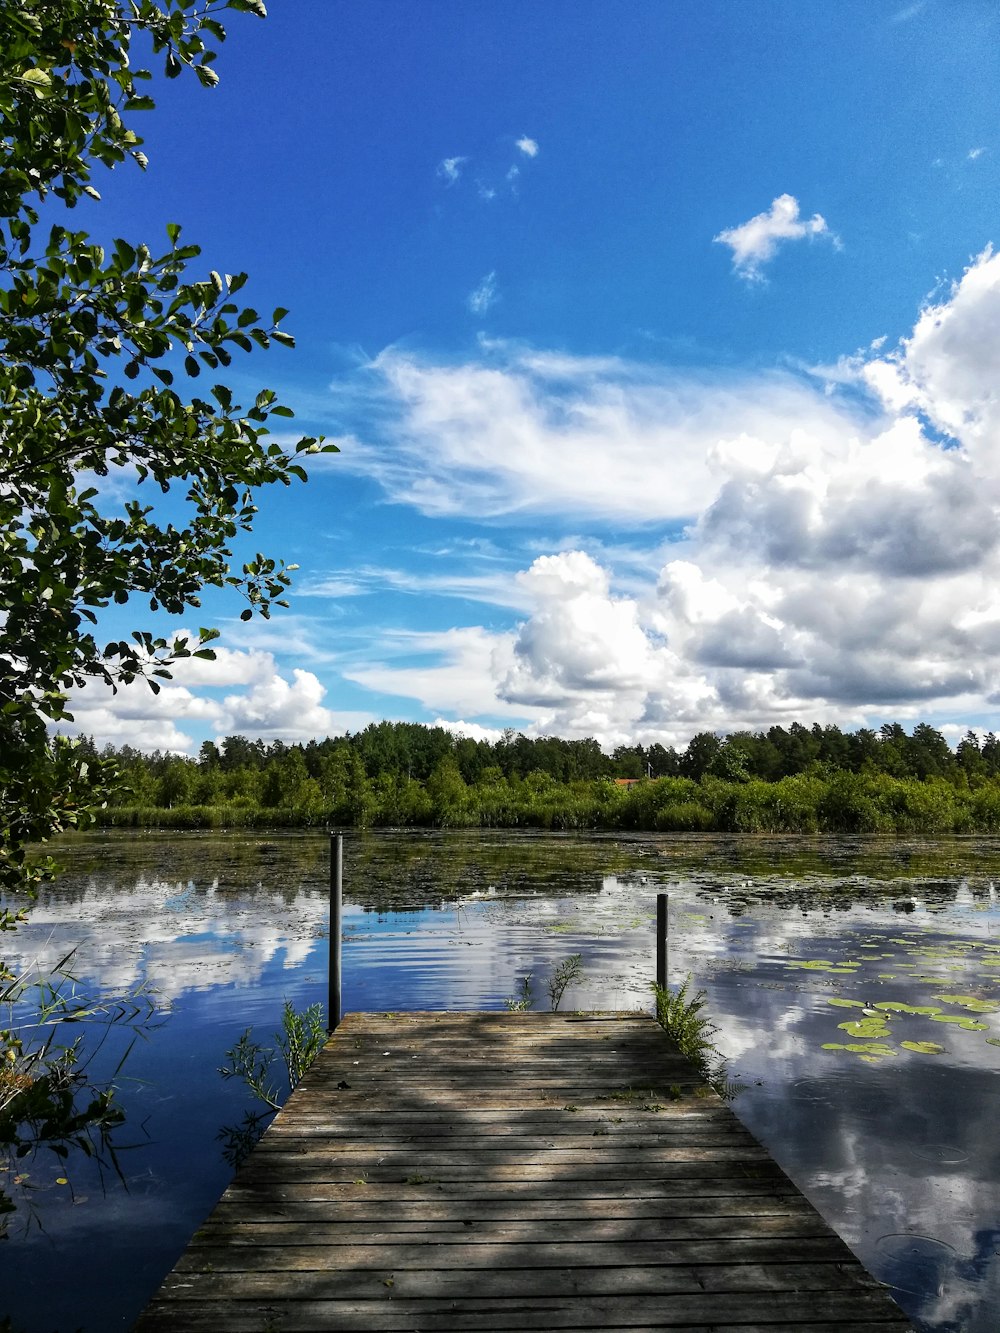 brown wooden dock on lake under blue and white cloudy sky during daytime